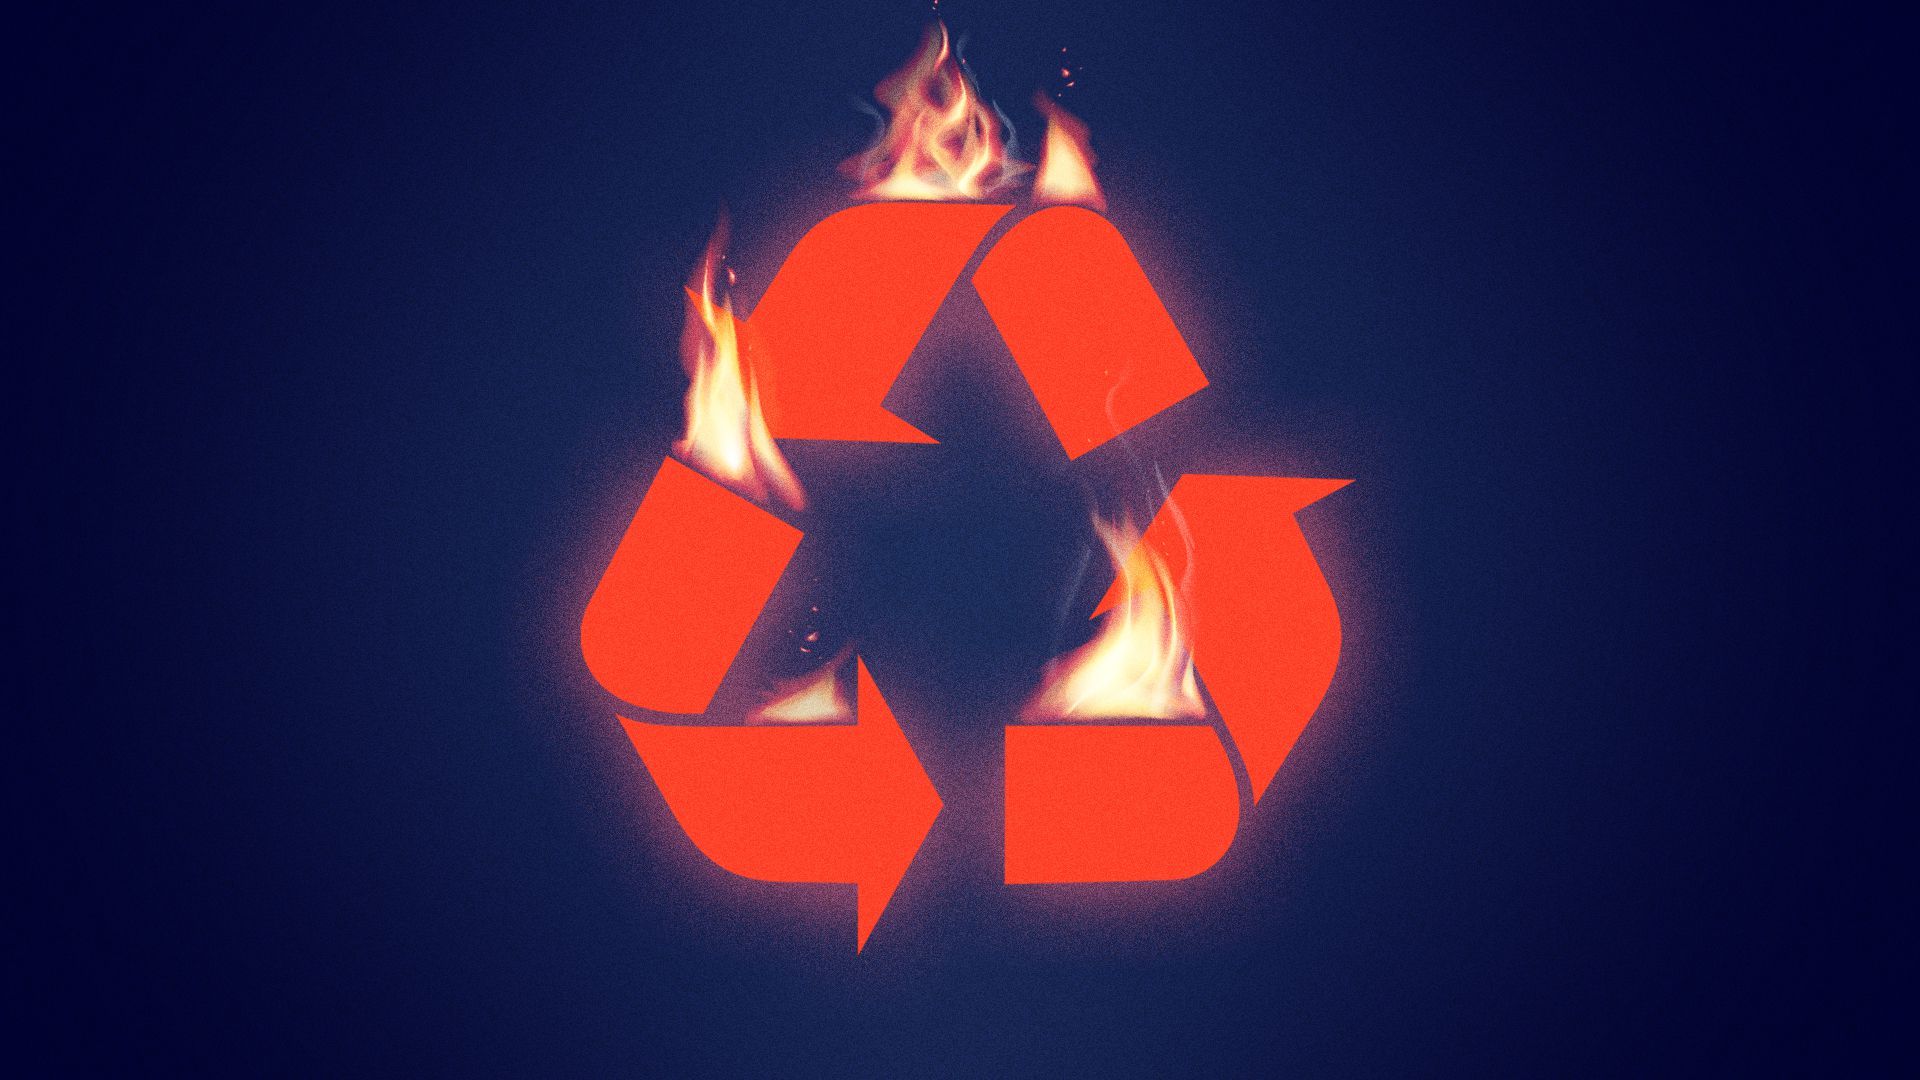 Illustration of a recycling symbol on fire. 